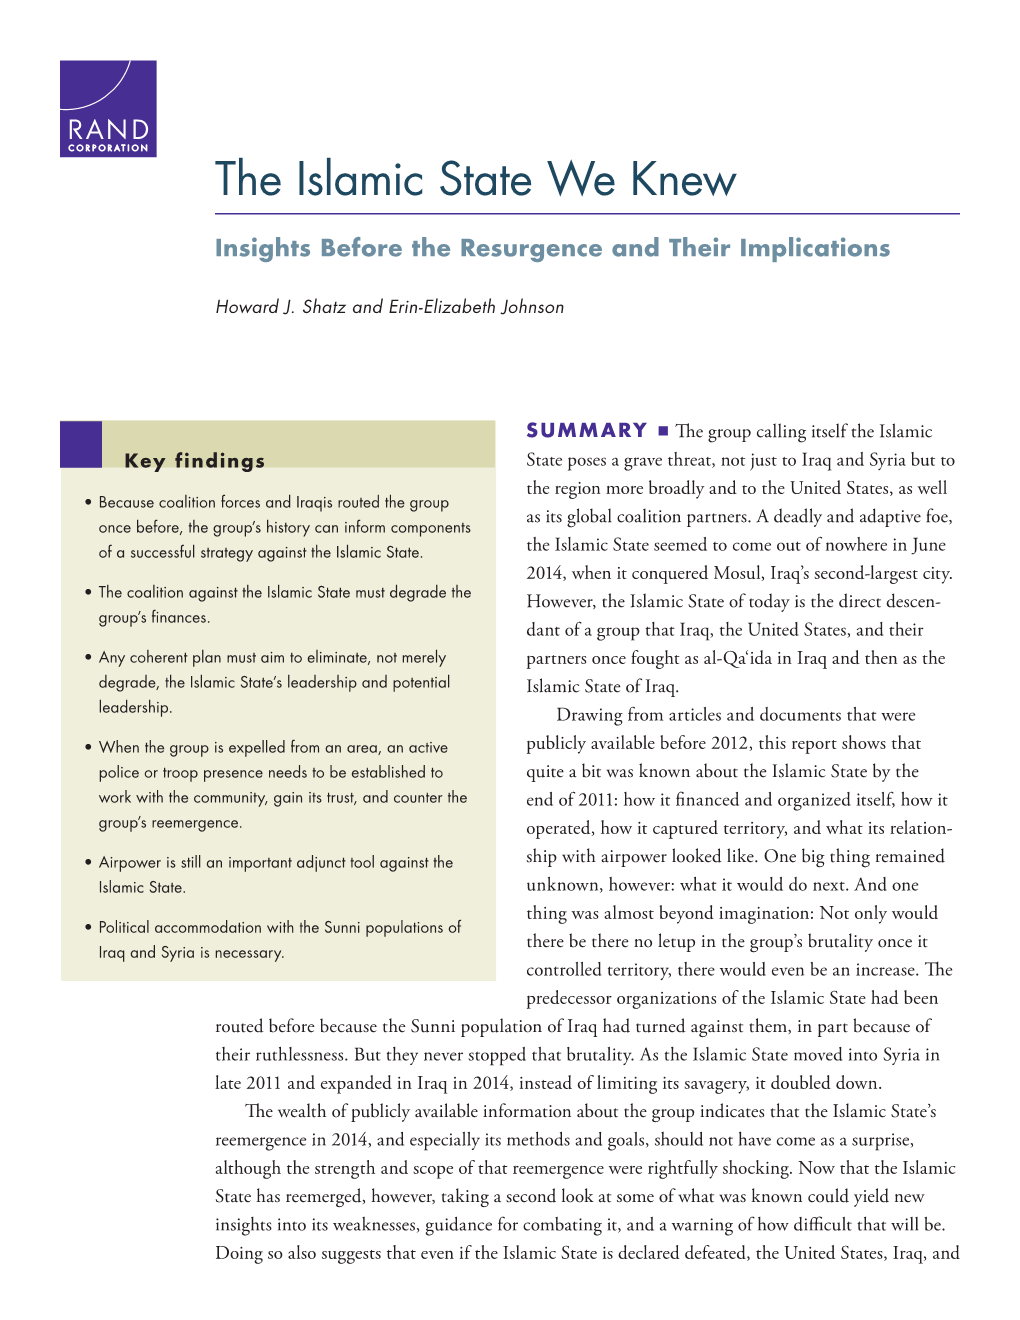 The Islamic State We Knew